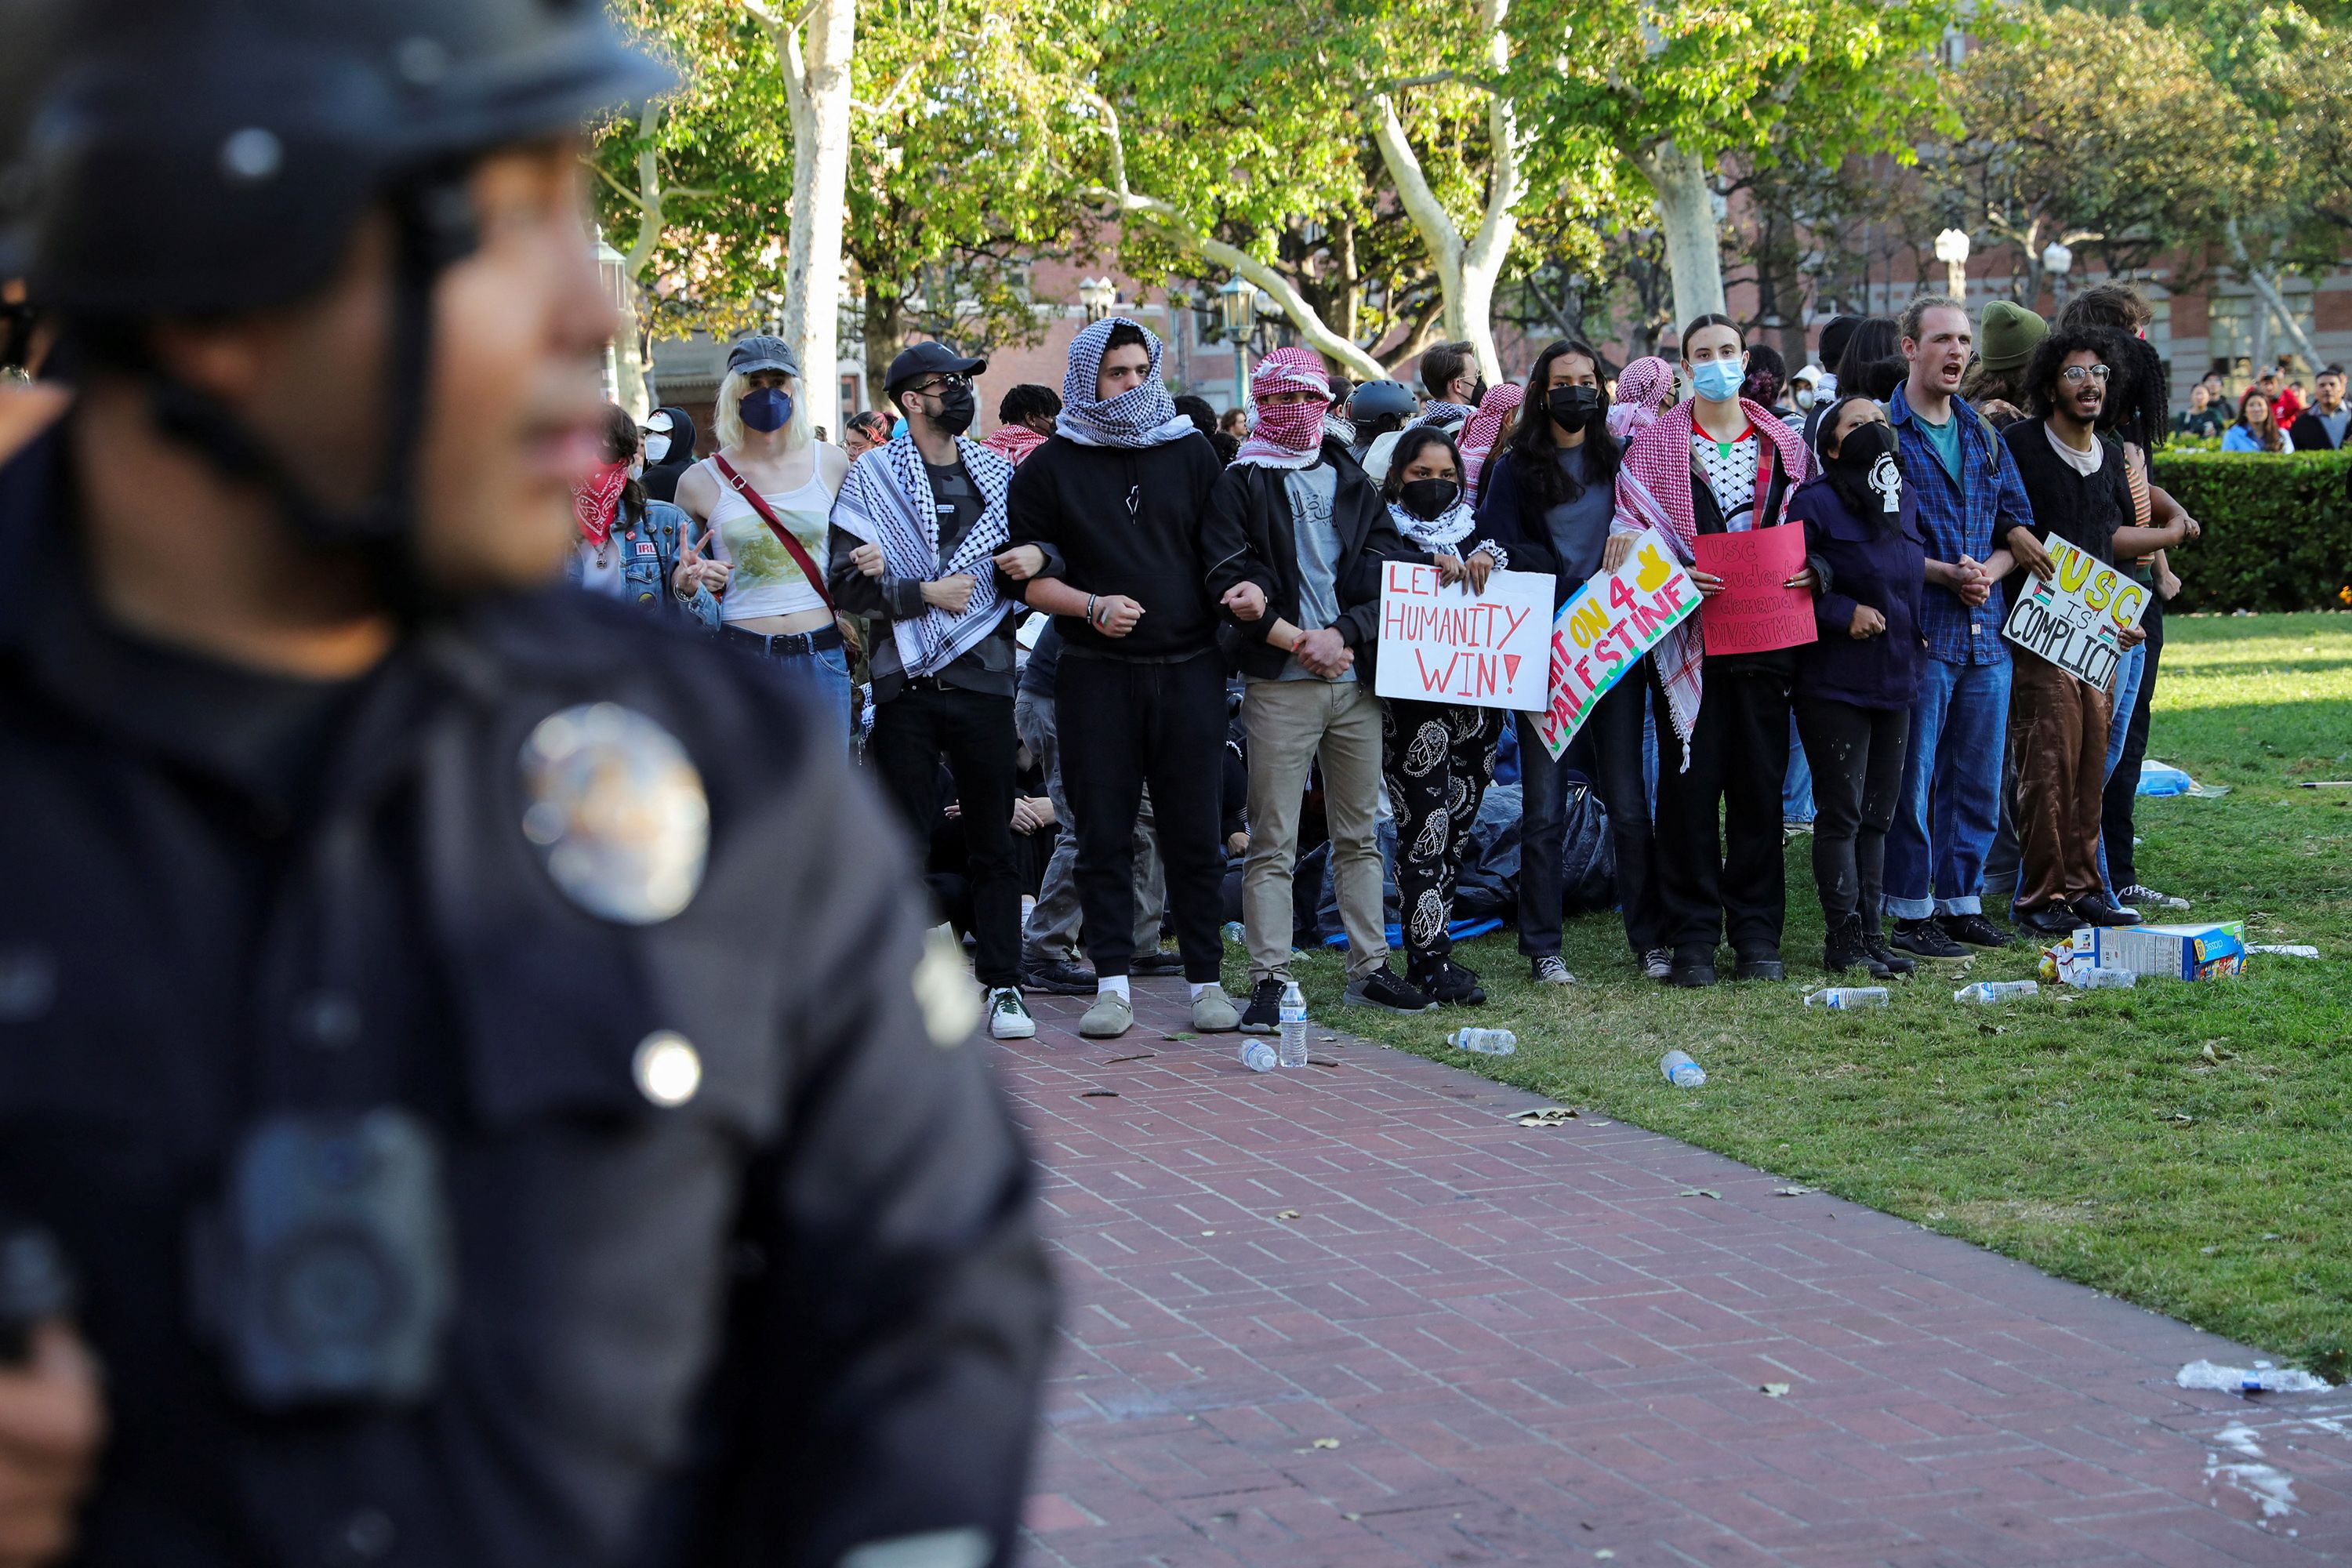 Police stand near protesters at the University of Southern California on April 24.